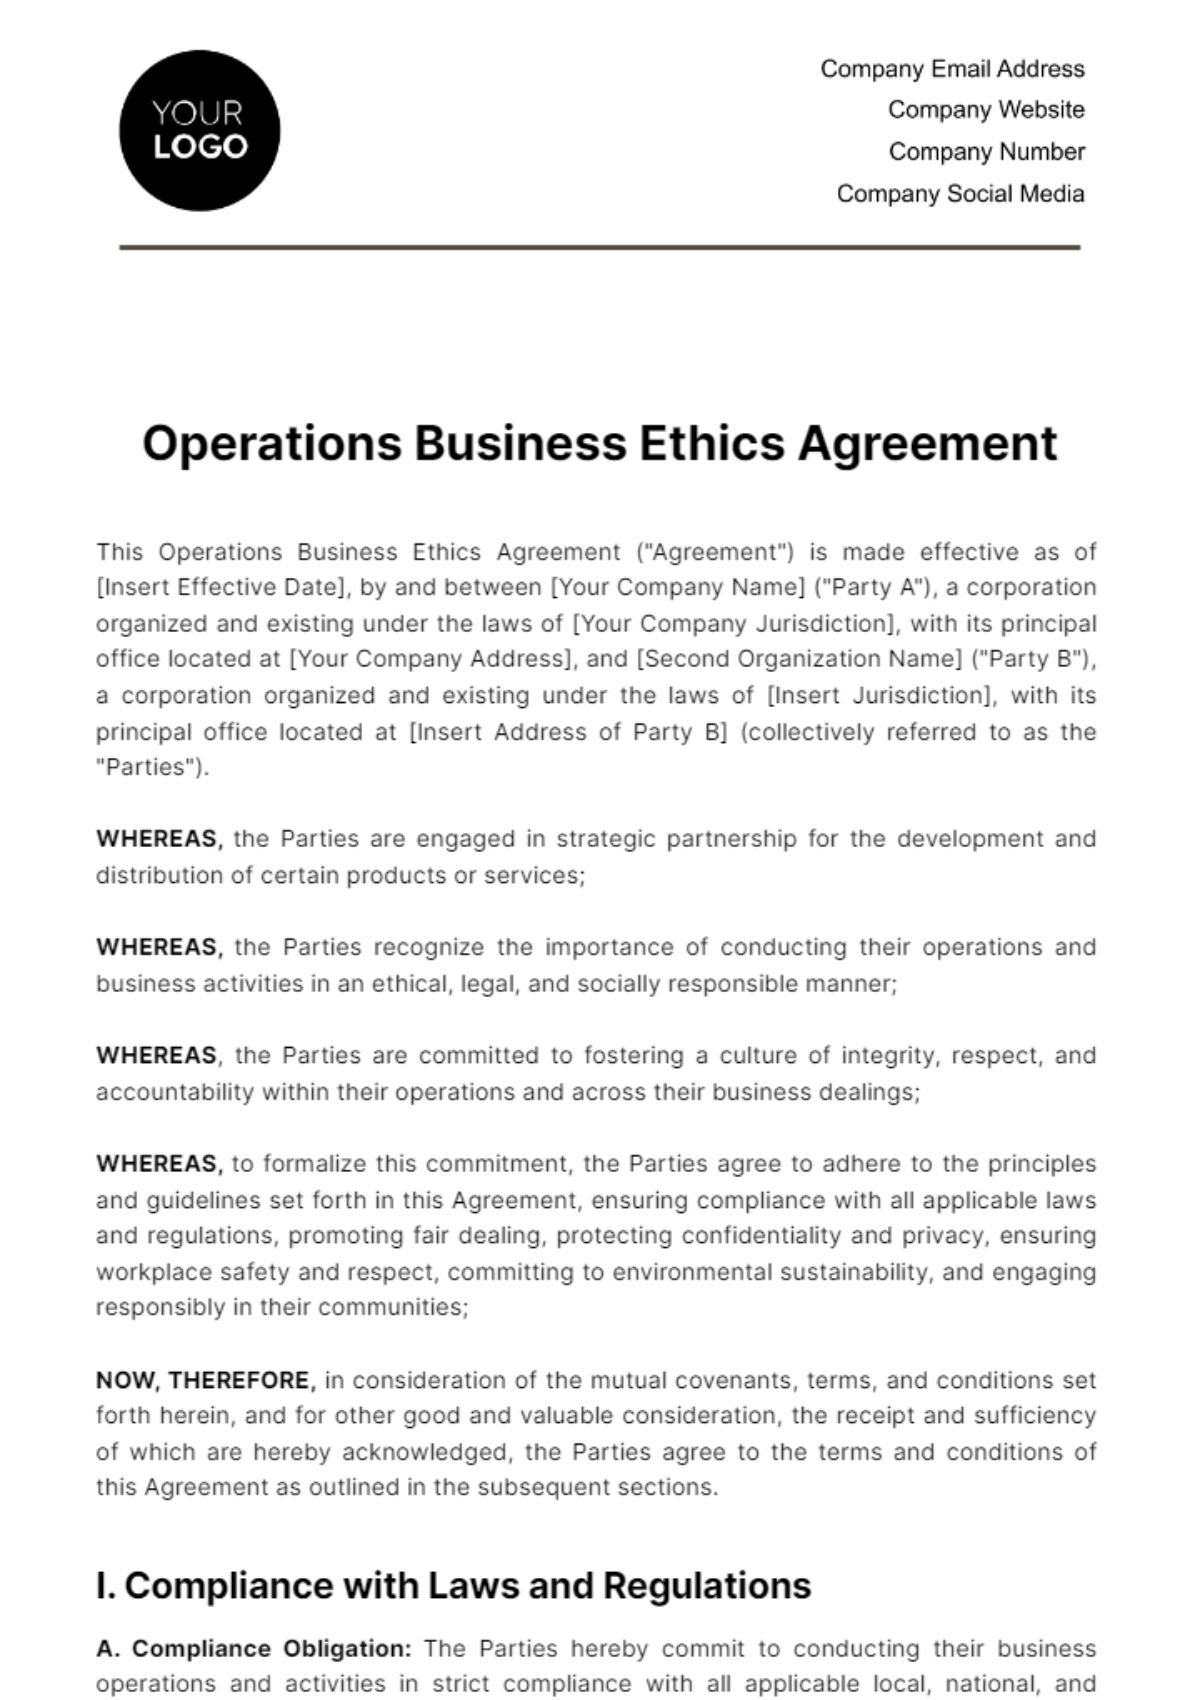 Operations Business Ethics Agreement Template